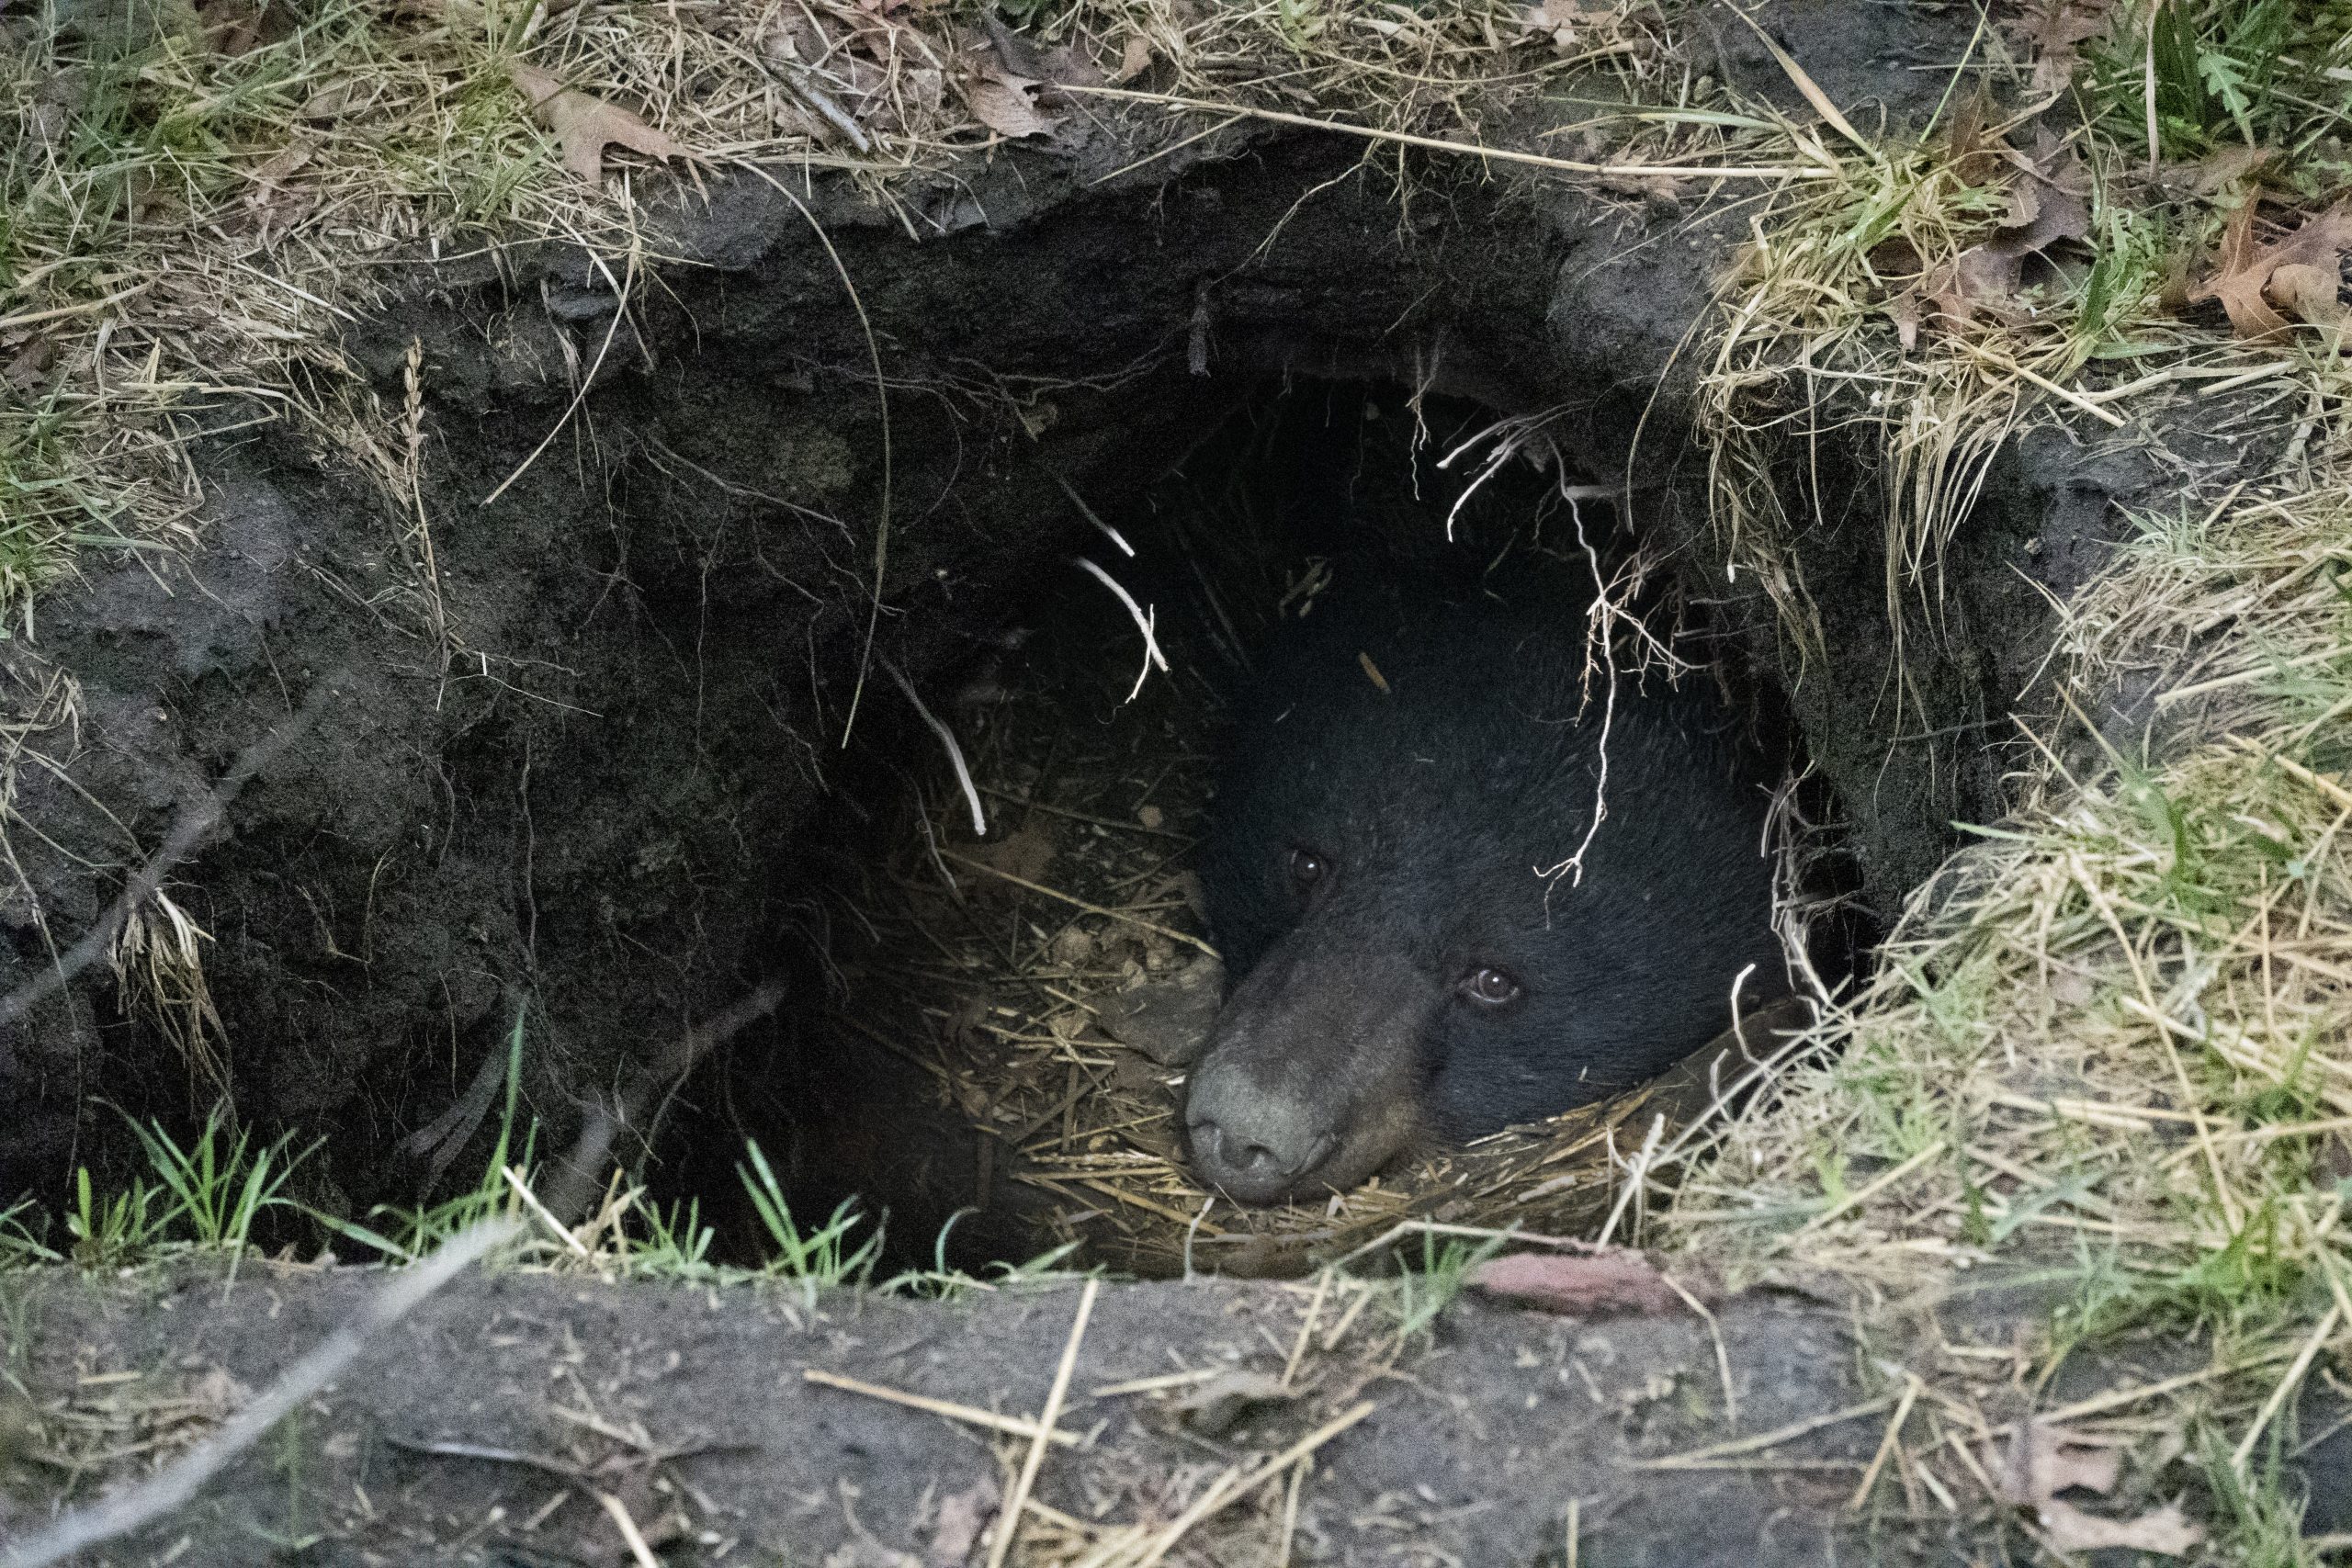 Val the Black bear peeking out of her den during the end of her torpor